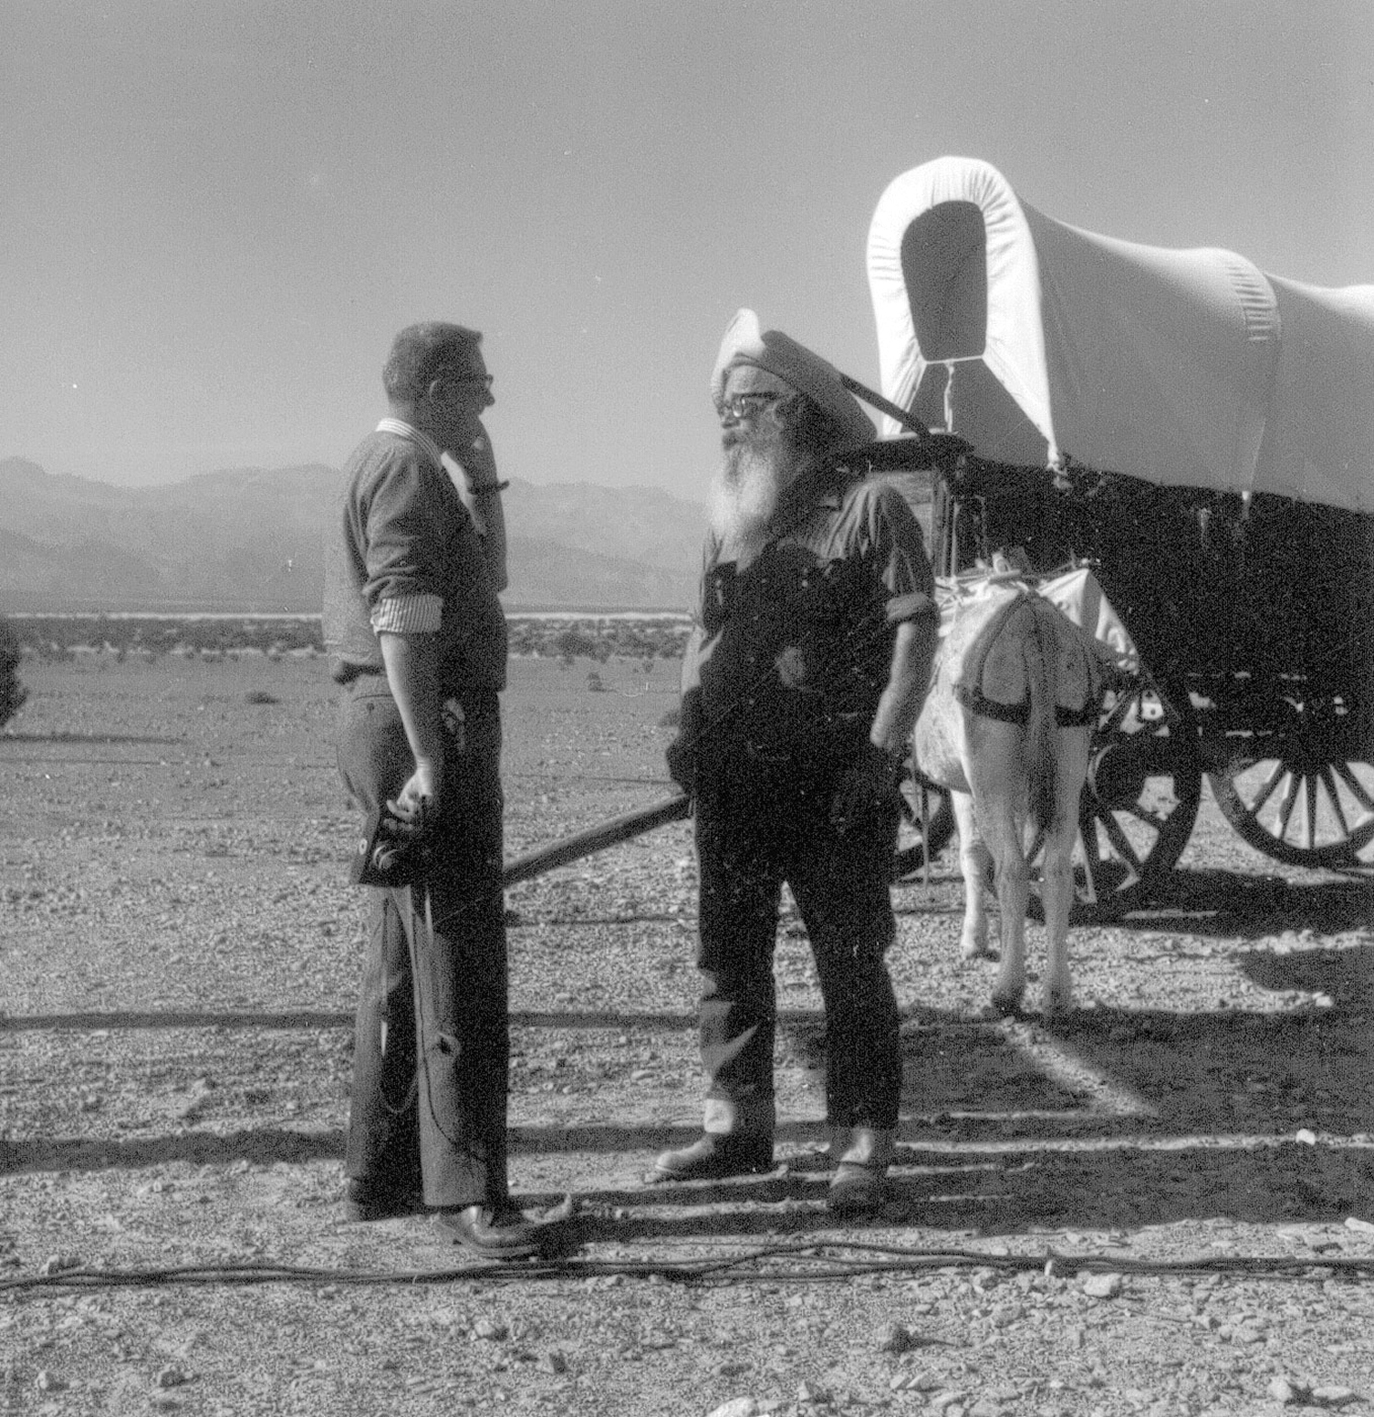 Jean Prouvé in the Far West during his trip to the United States, fall 1963.